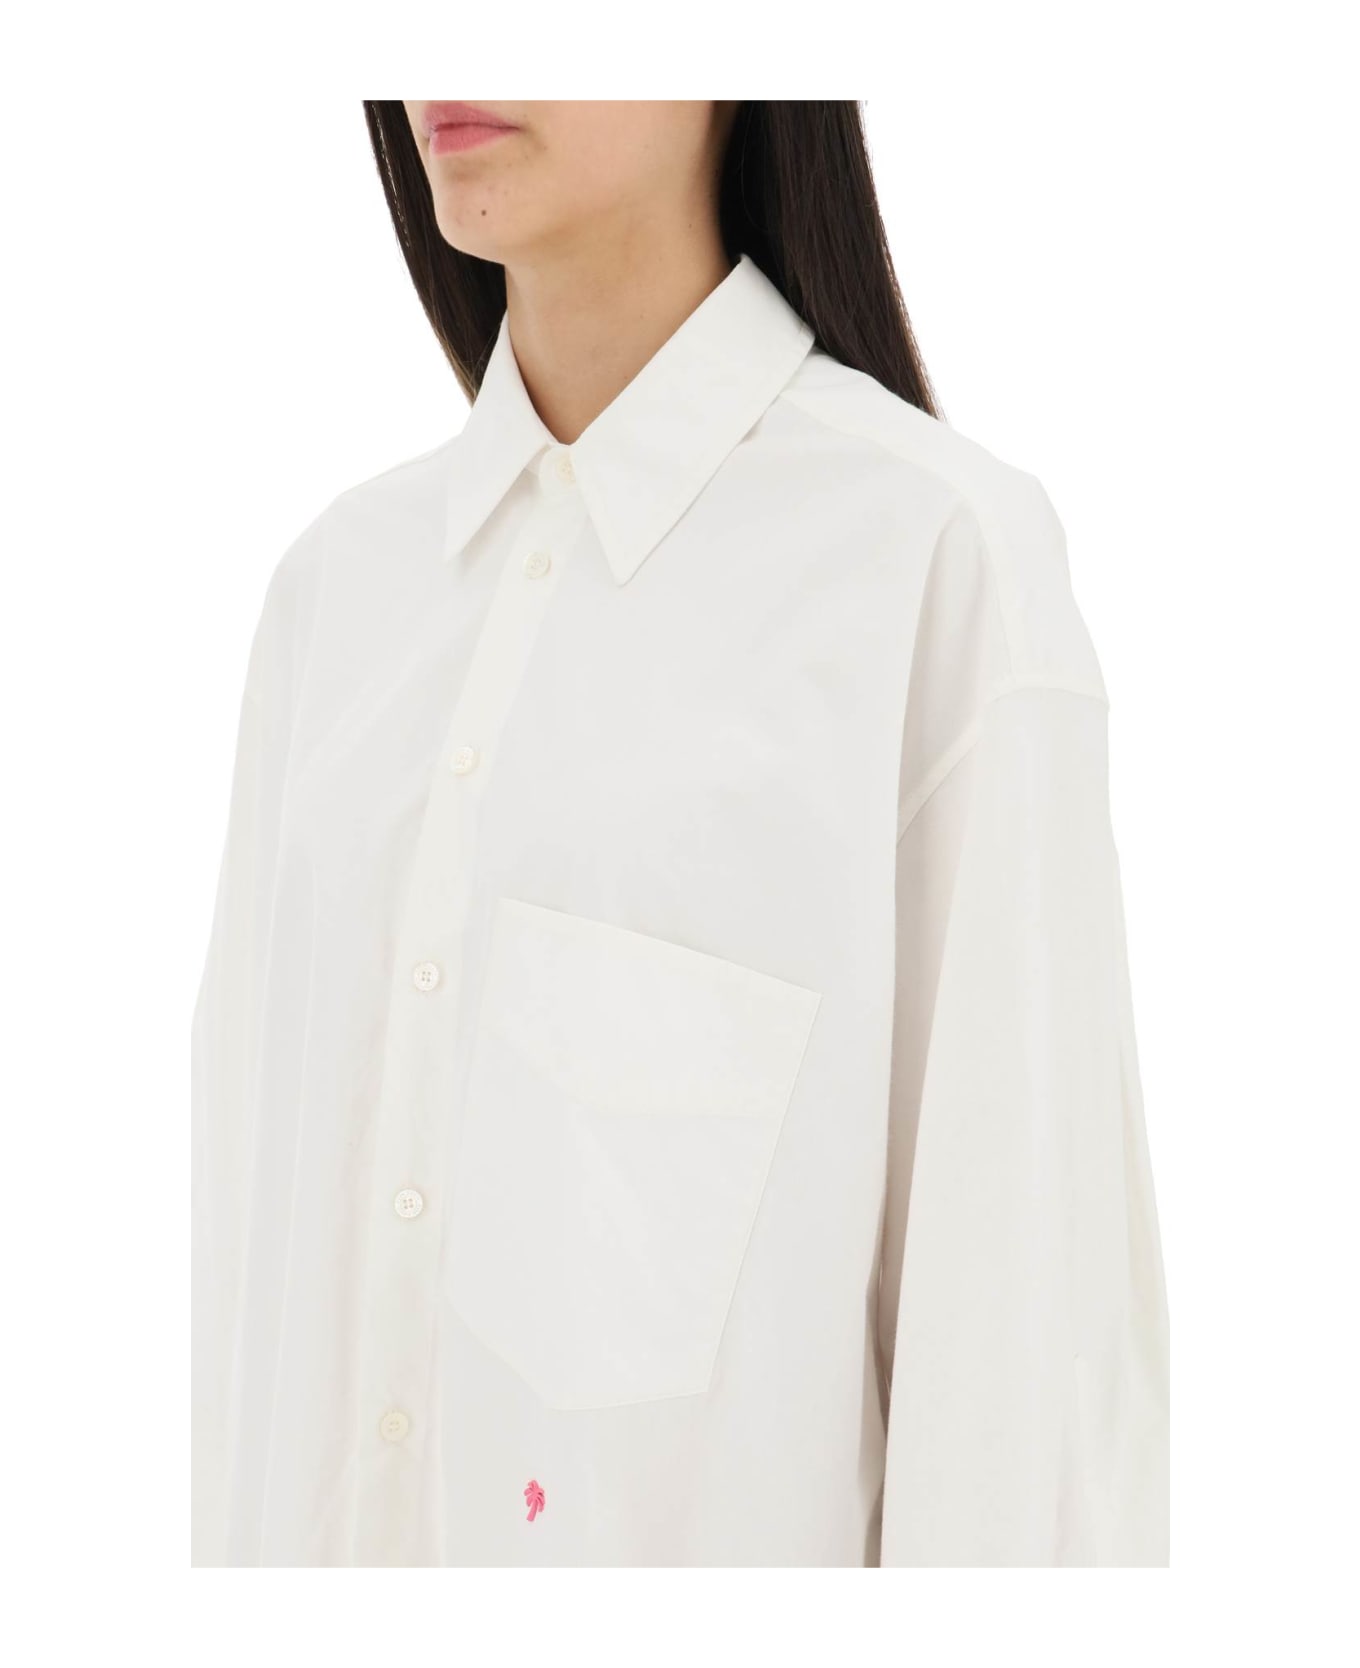 Palm Angels Shirt Dress With Bell Sleeves - WHITE BLACK (White)